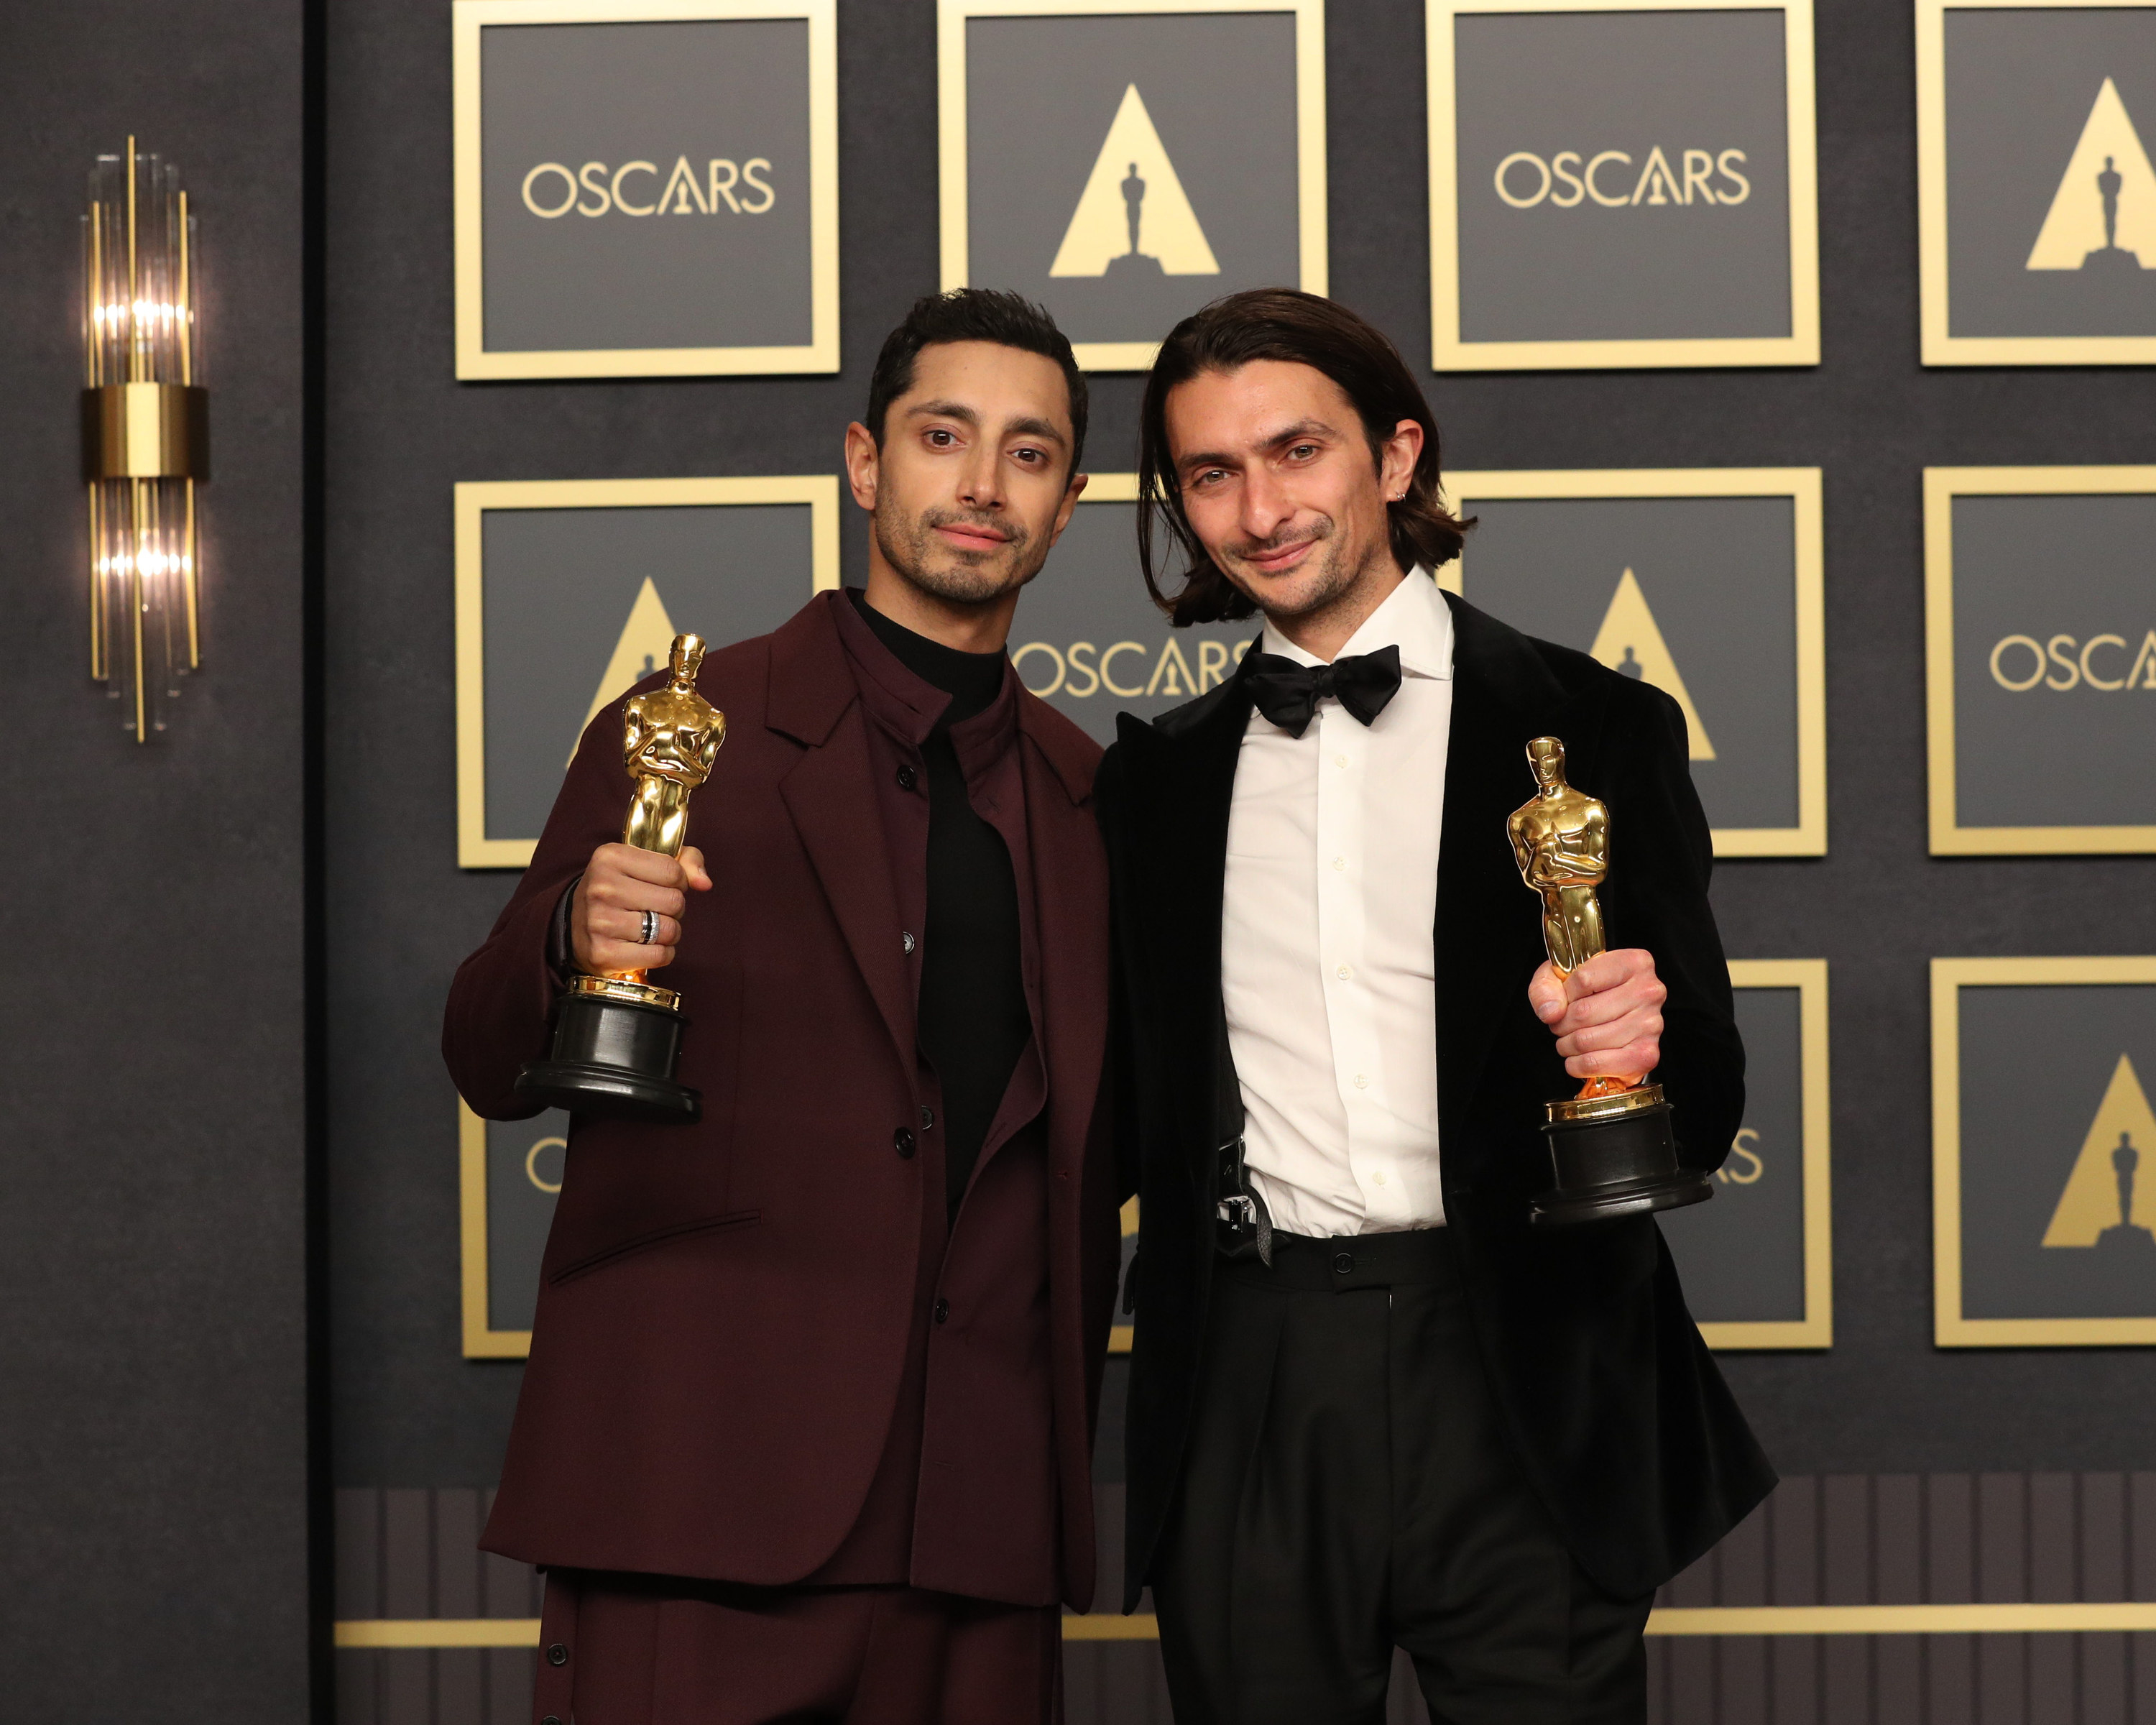 Riz holds his Oscar, with the wall behind him covered in black and gold Oscars posters